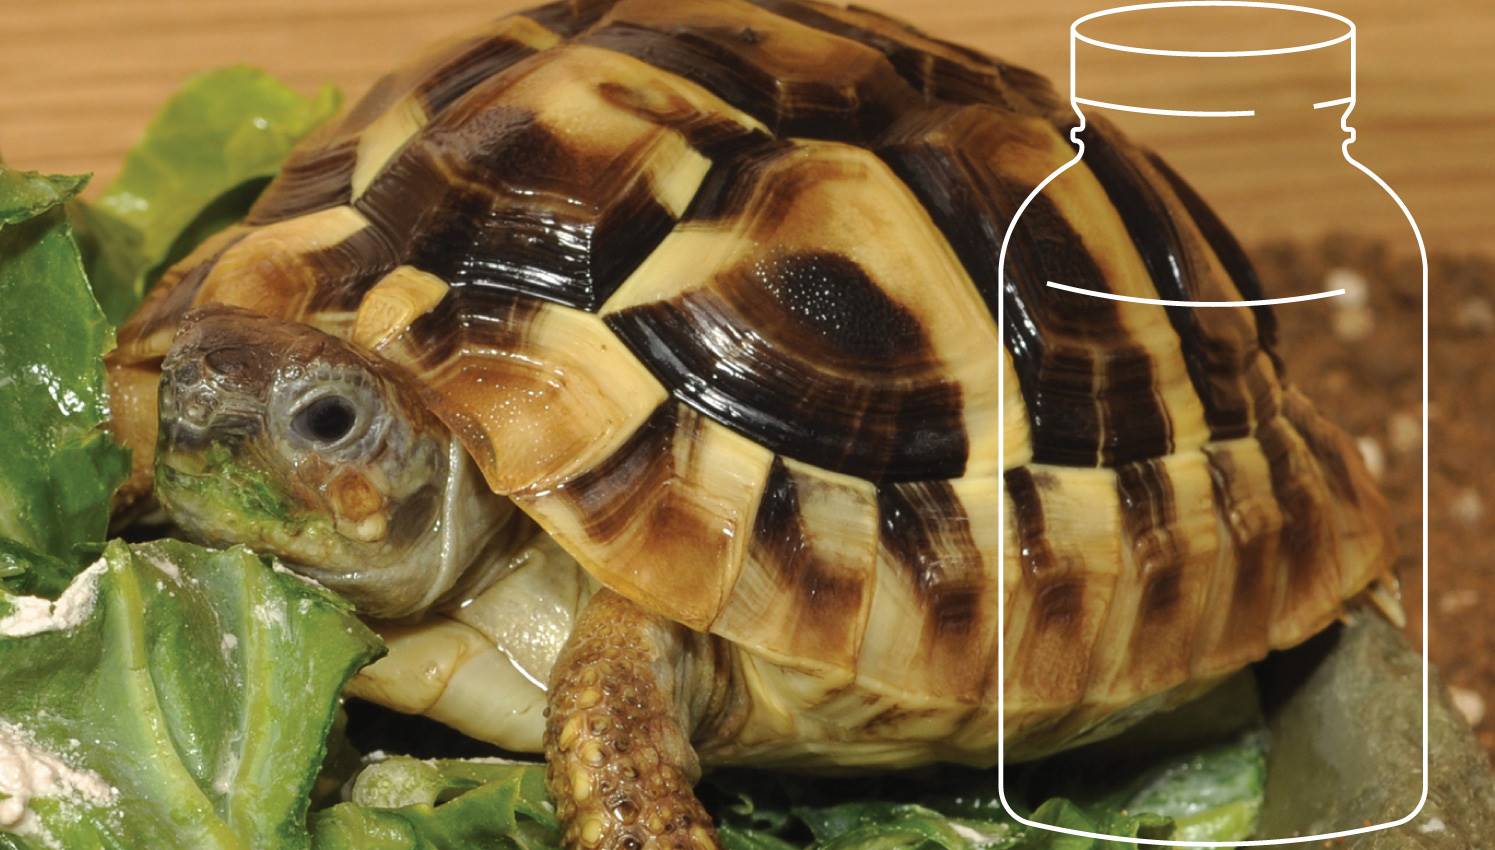 Tortoise eating Cabbage with Supplements